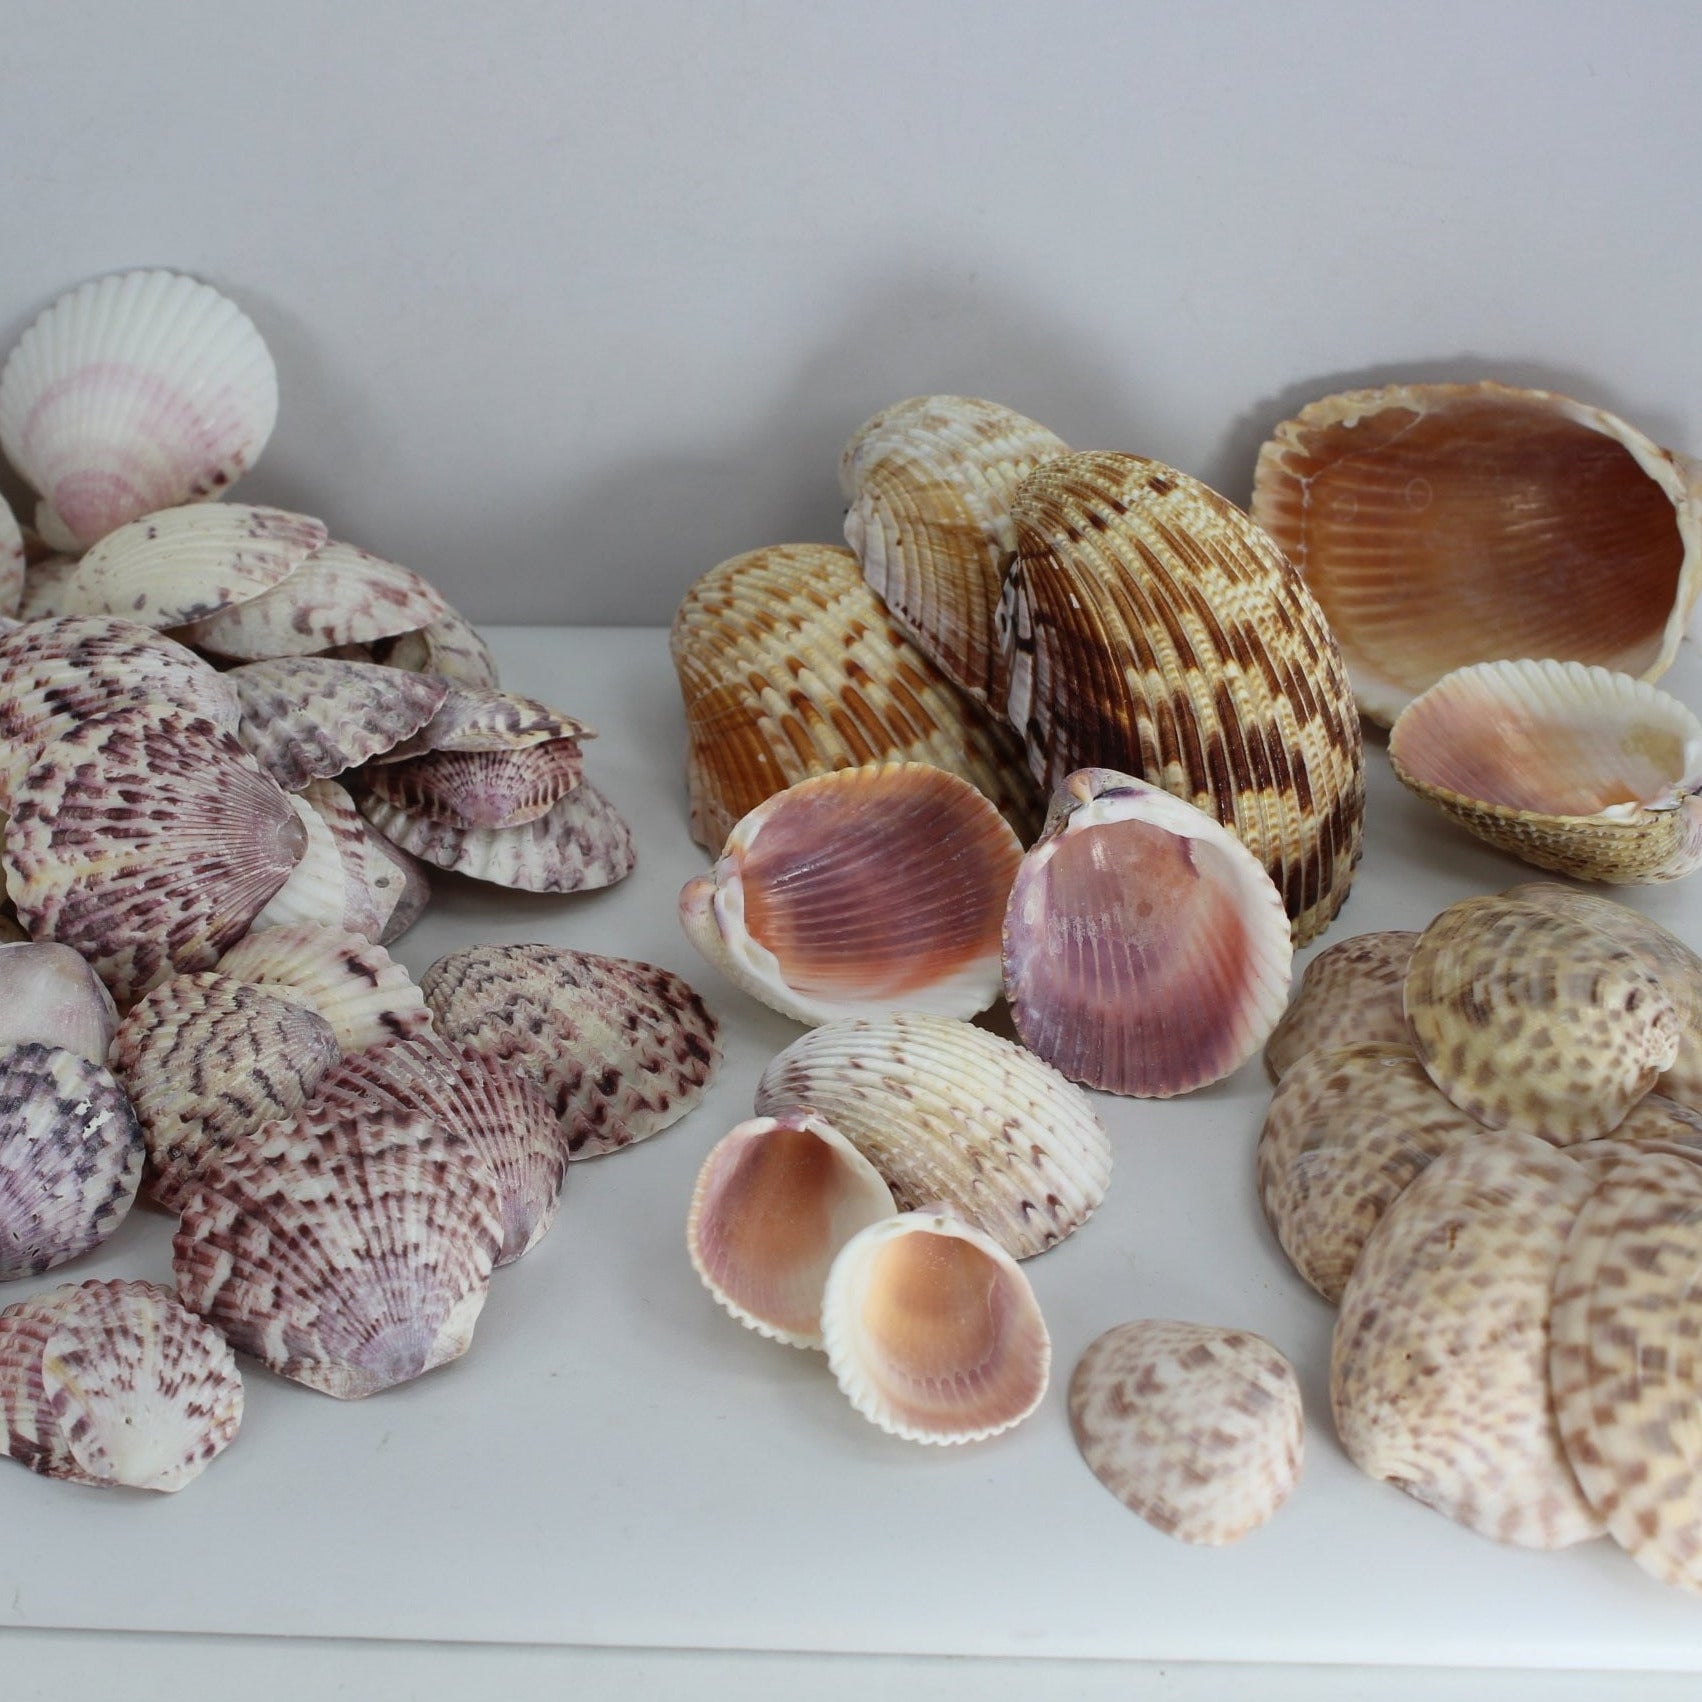 Florida Natural Shells Collection 80 Colorful Scallops Cockles Calico Clam Crafts Wreath Mirror Jewelry Beach Decor